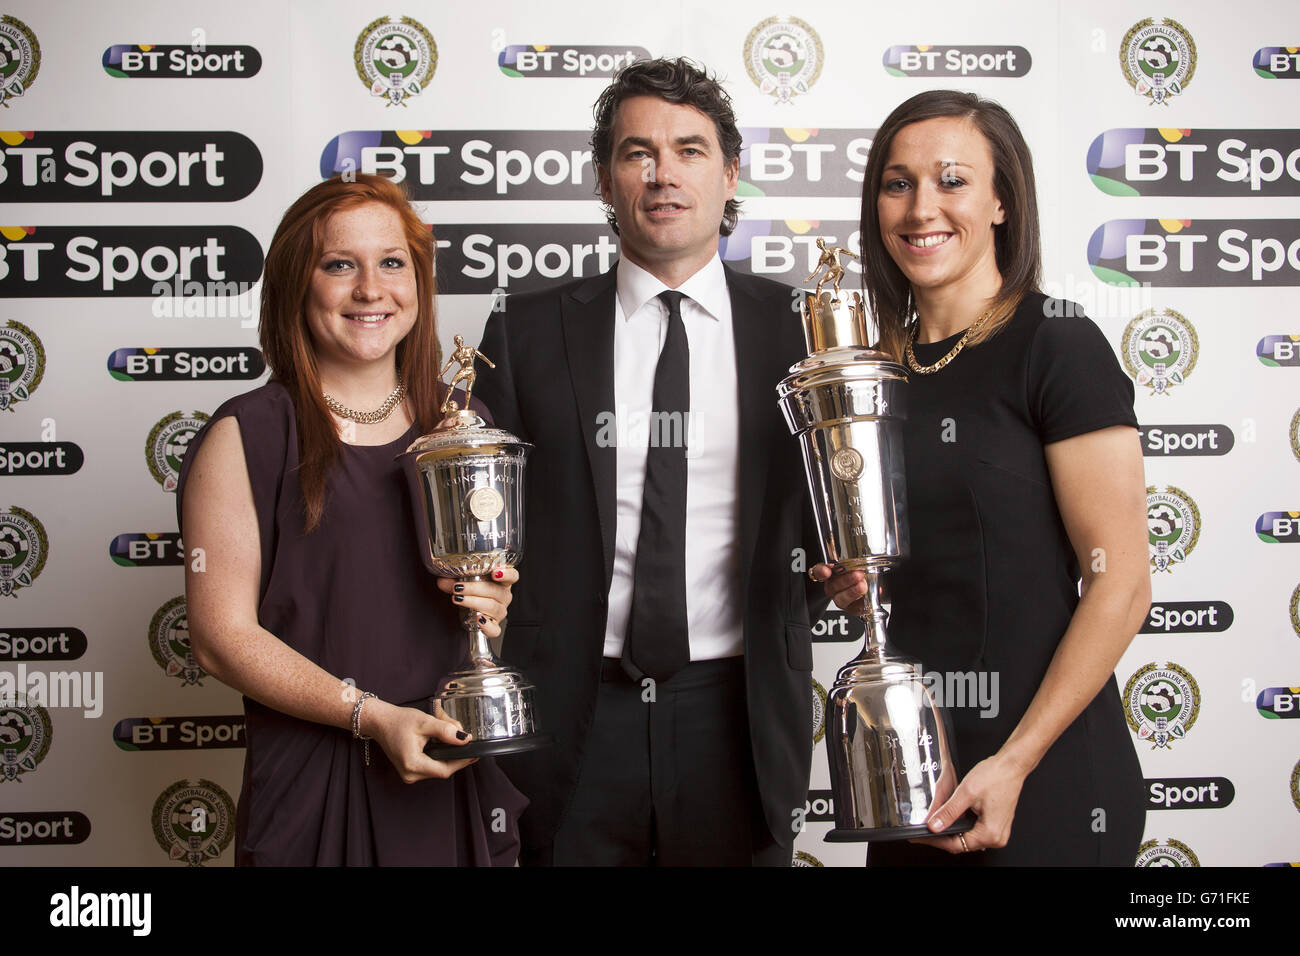 Liverpool Ladies Lucy Bronze (right) with the PFA Player Of The Year Award and Liverpool Ladies Martha Harris (left) with the PFA Young Player Of The Year Award, alongside BT Group Chief Executive Gavin Patterson, during the PFA Player of the Year Awards at the Grosvenor Hotel, London. Stock Photo